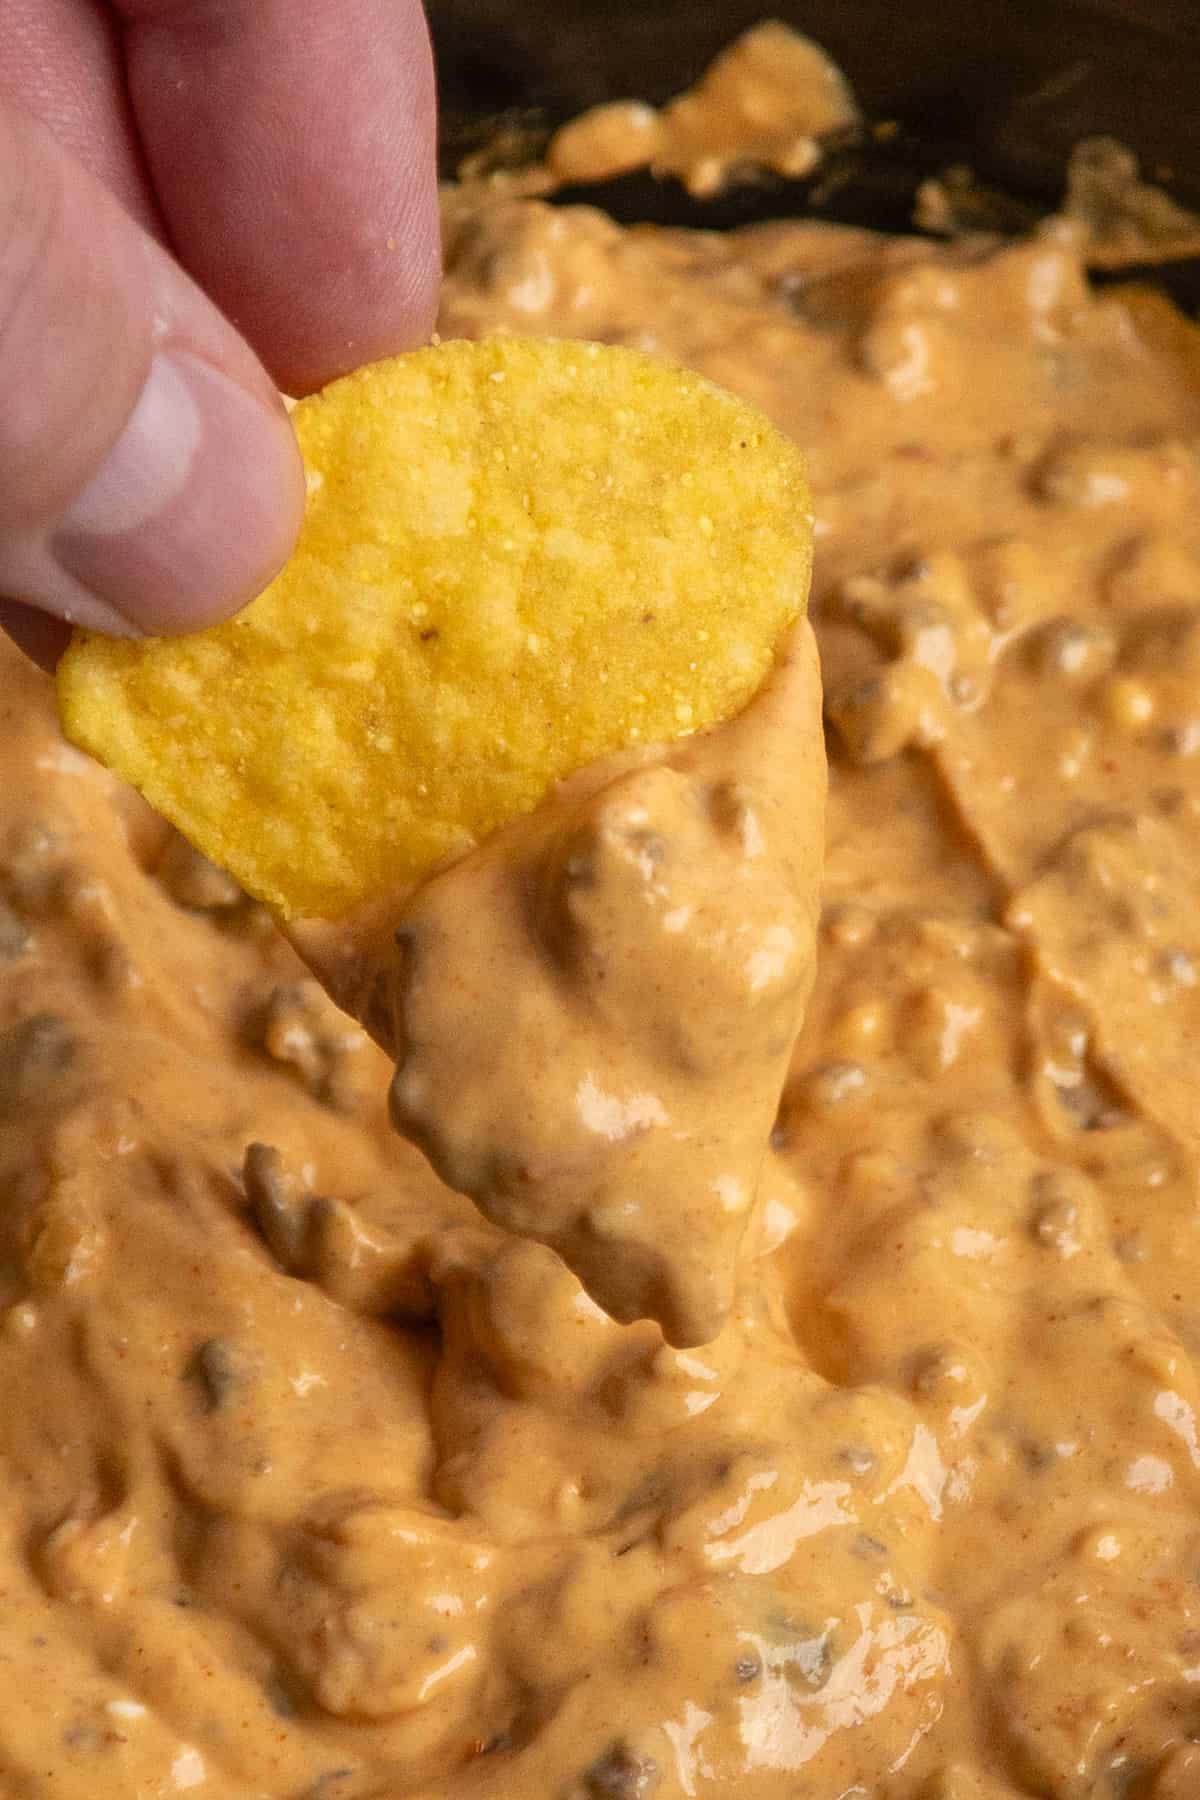 A hand holding a tortilla chip that has been dipped into taco dip.